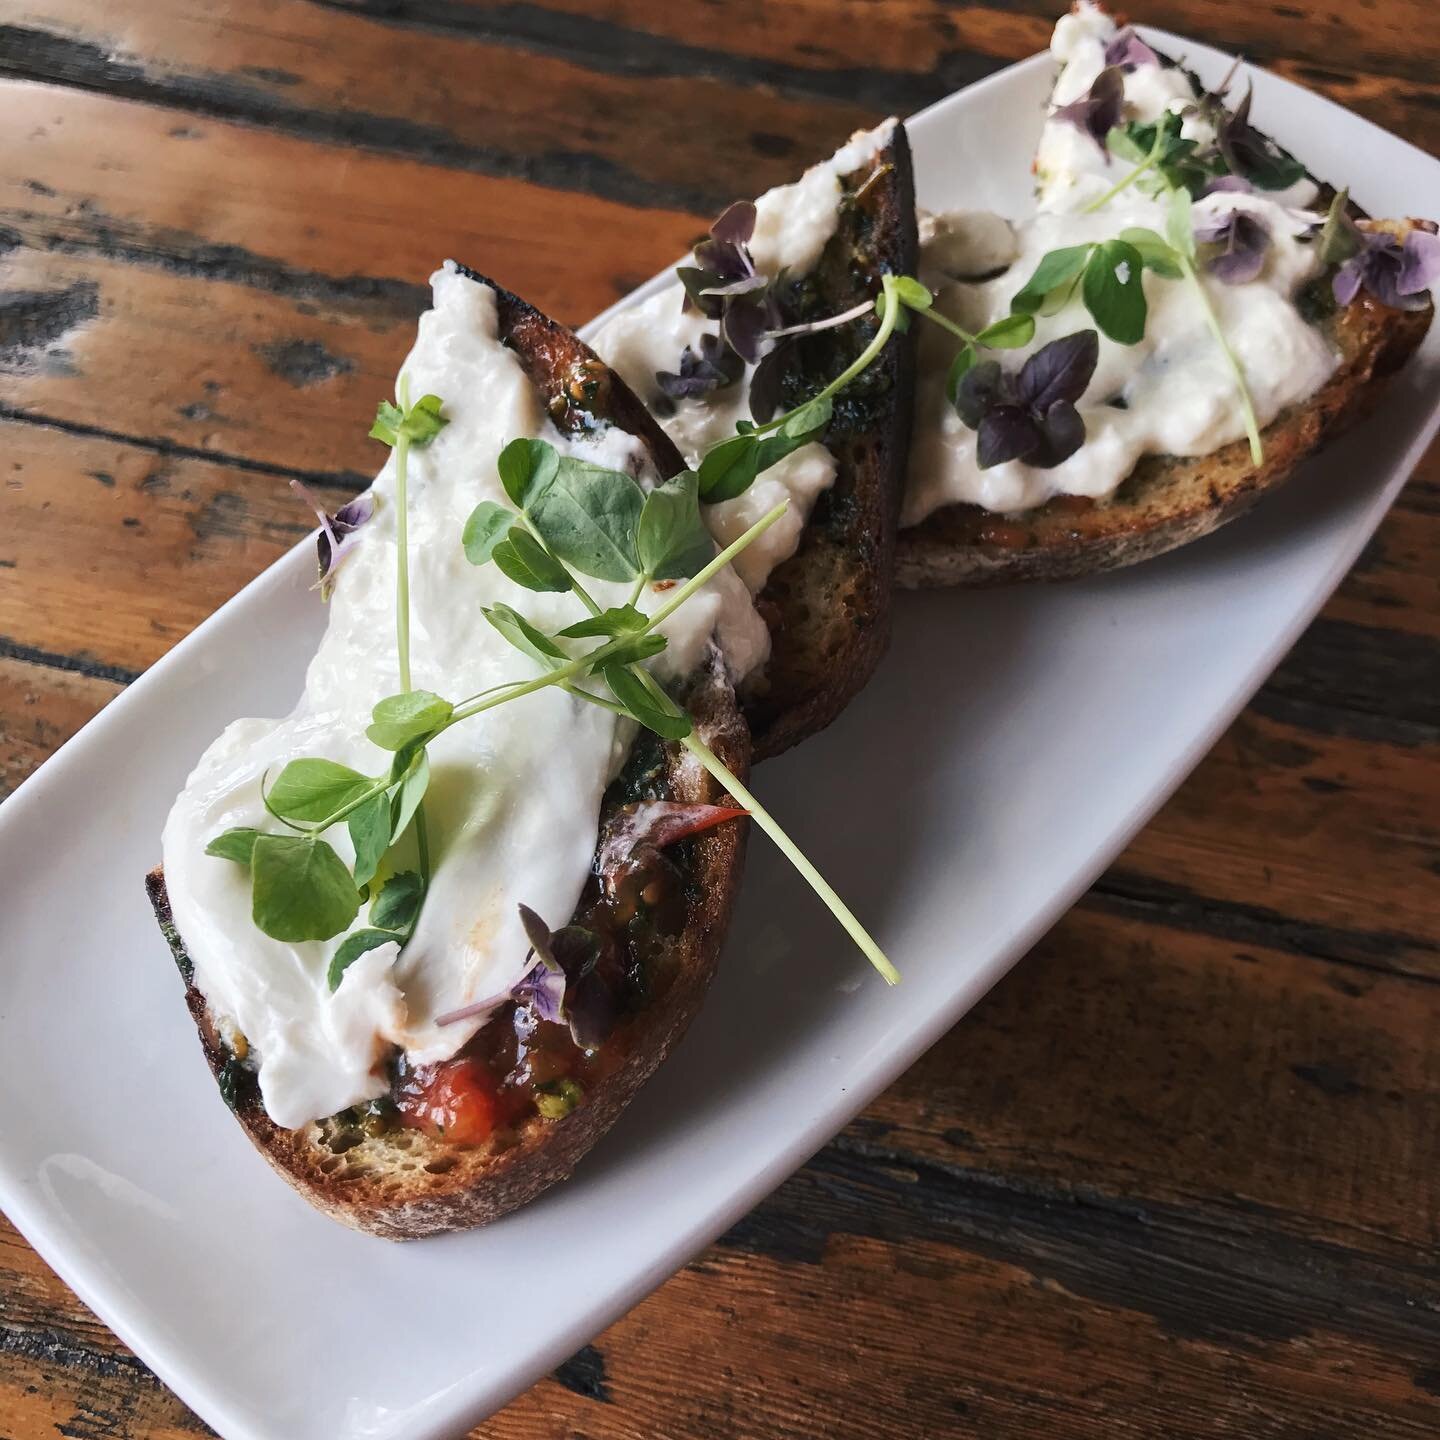 Check out our new version of a longtime favorite: burrata, pesto, local tomato jam, sea salt + fresh herbs on grilled sourdough.